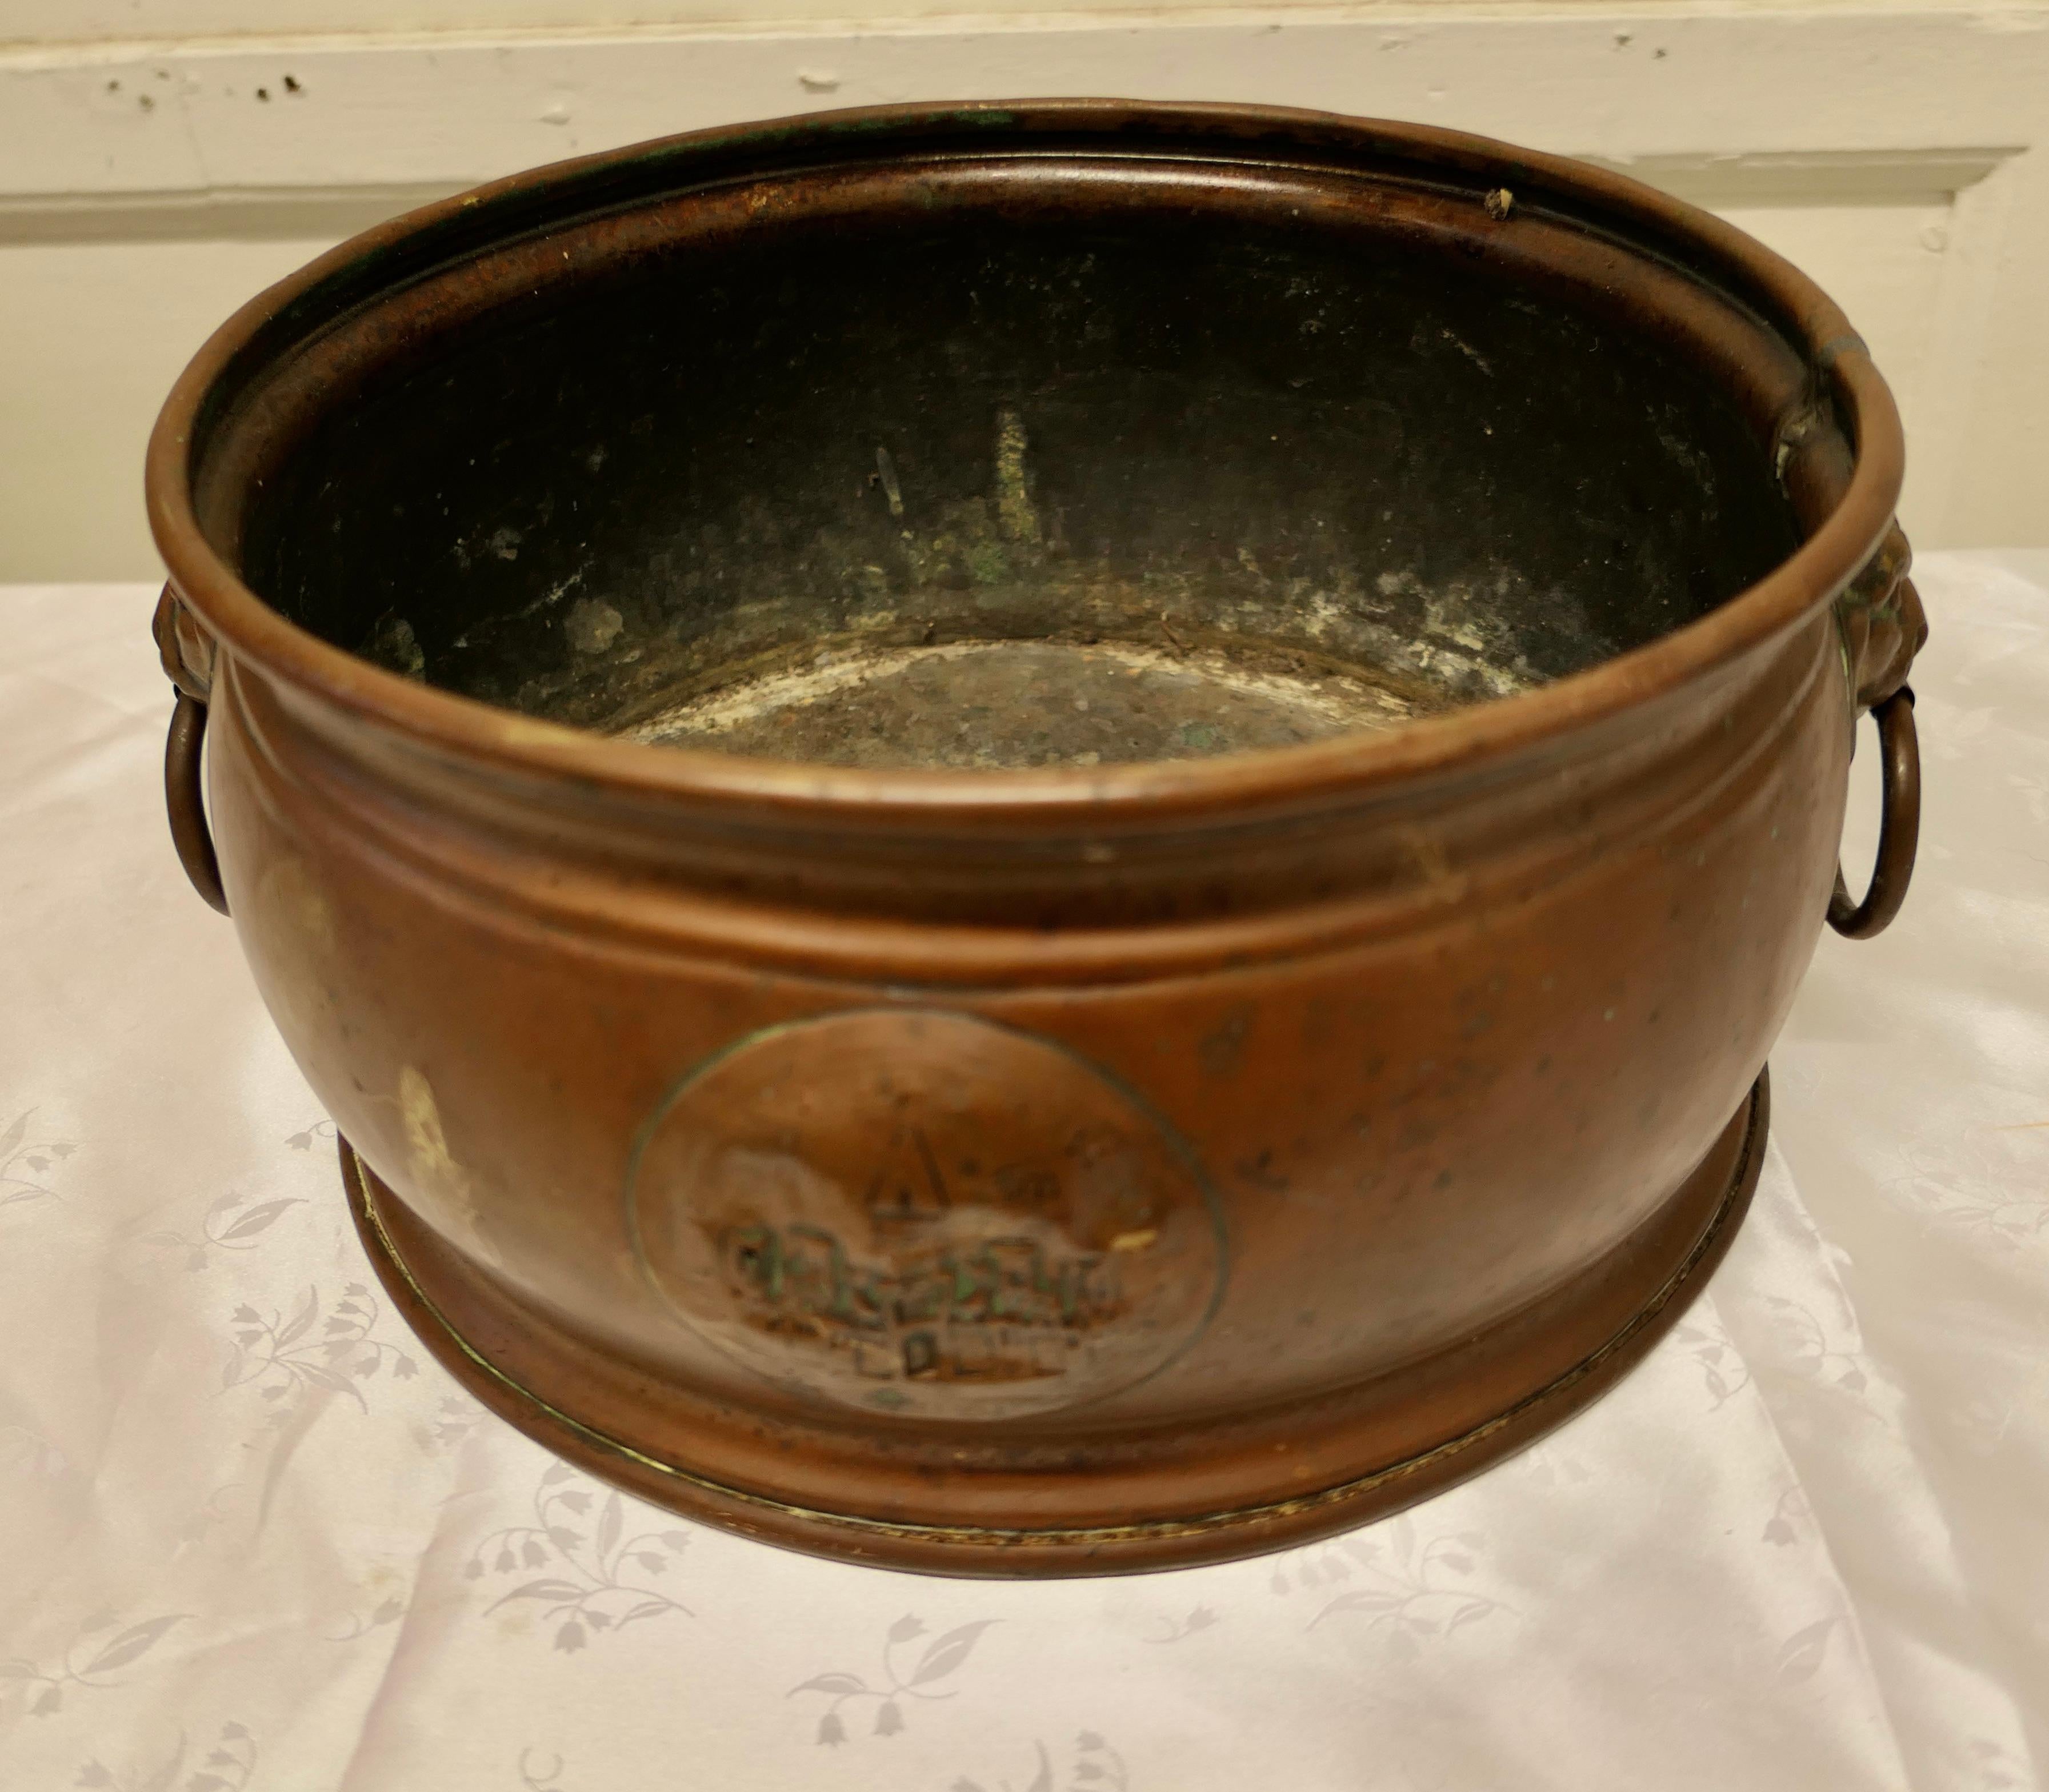 19th Century Arts and Crafts brass planter

This is a good quality brass piece, it is hand beaten, the brass has a very dark patina, it almost looks like copper, it has lions mask ring handles and a cartouche to the front showing the outline of a